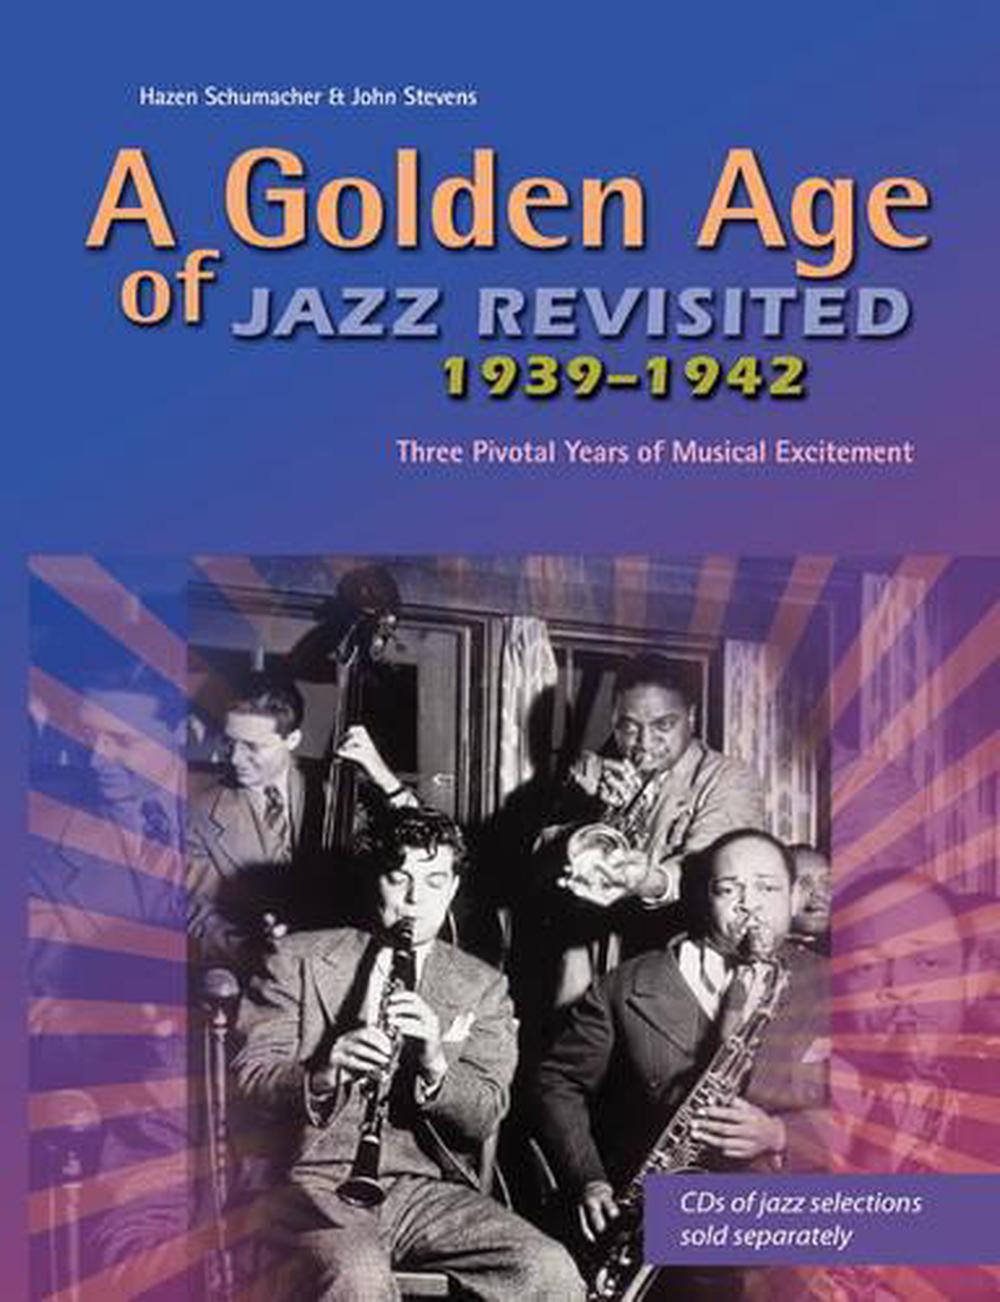 What decade is known as the golden age of jazz?